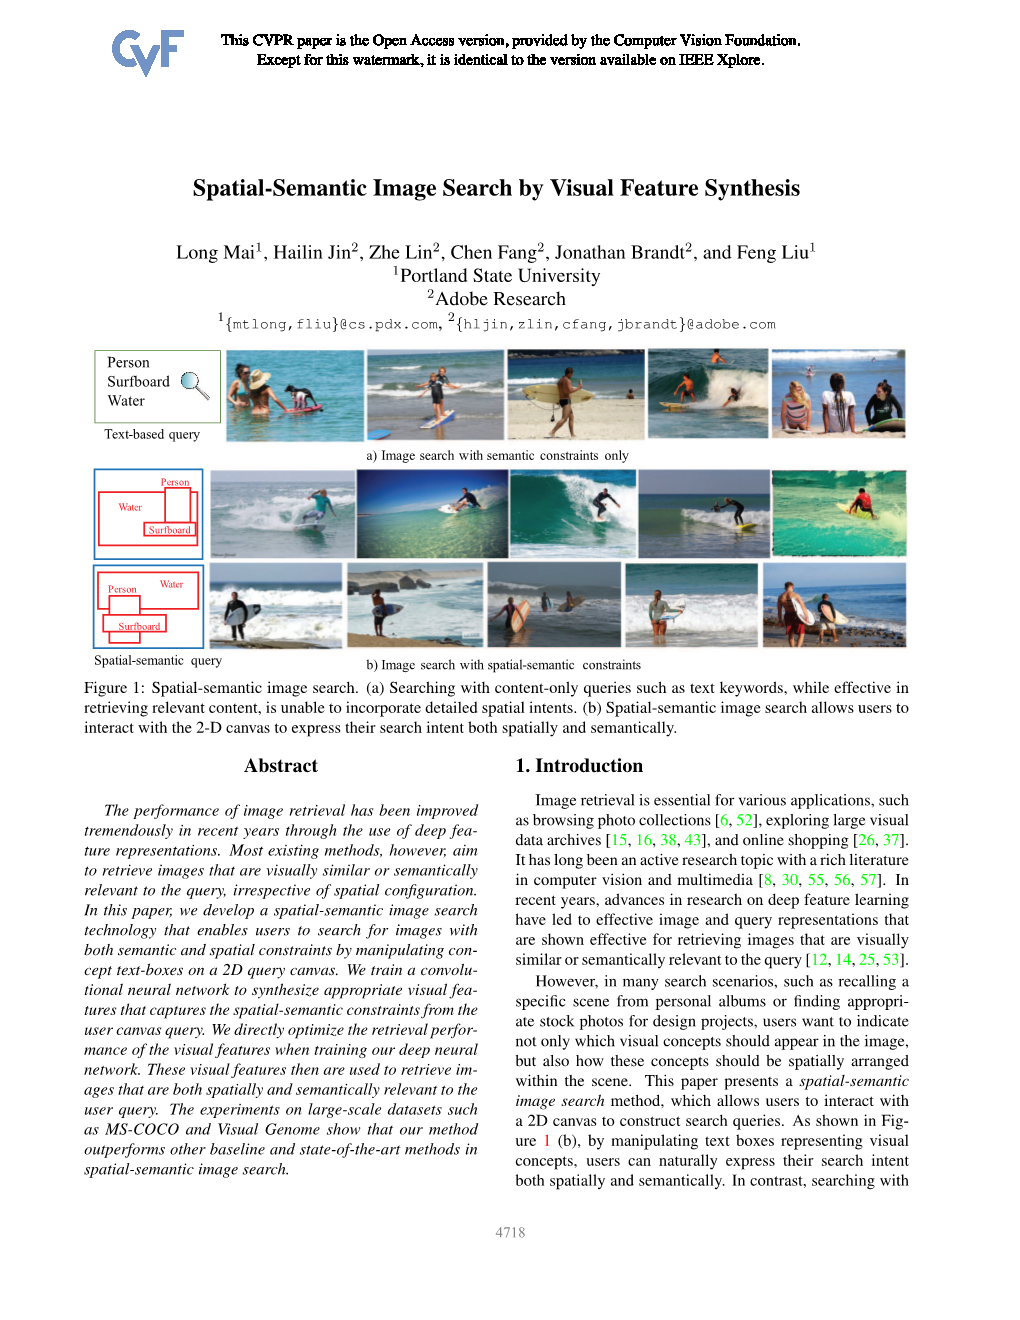 Spatial-Semantic Image Search by Visual Feature Synthesis